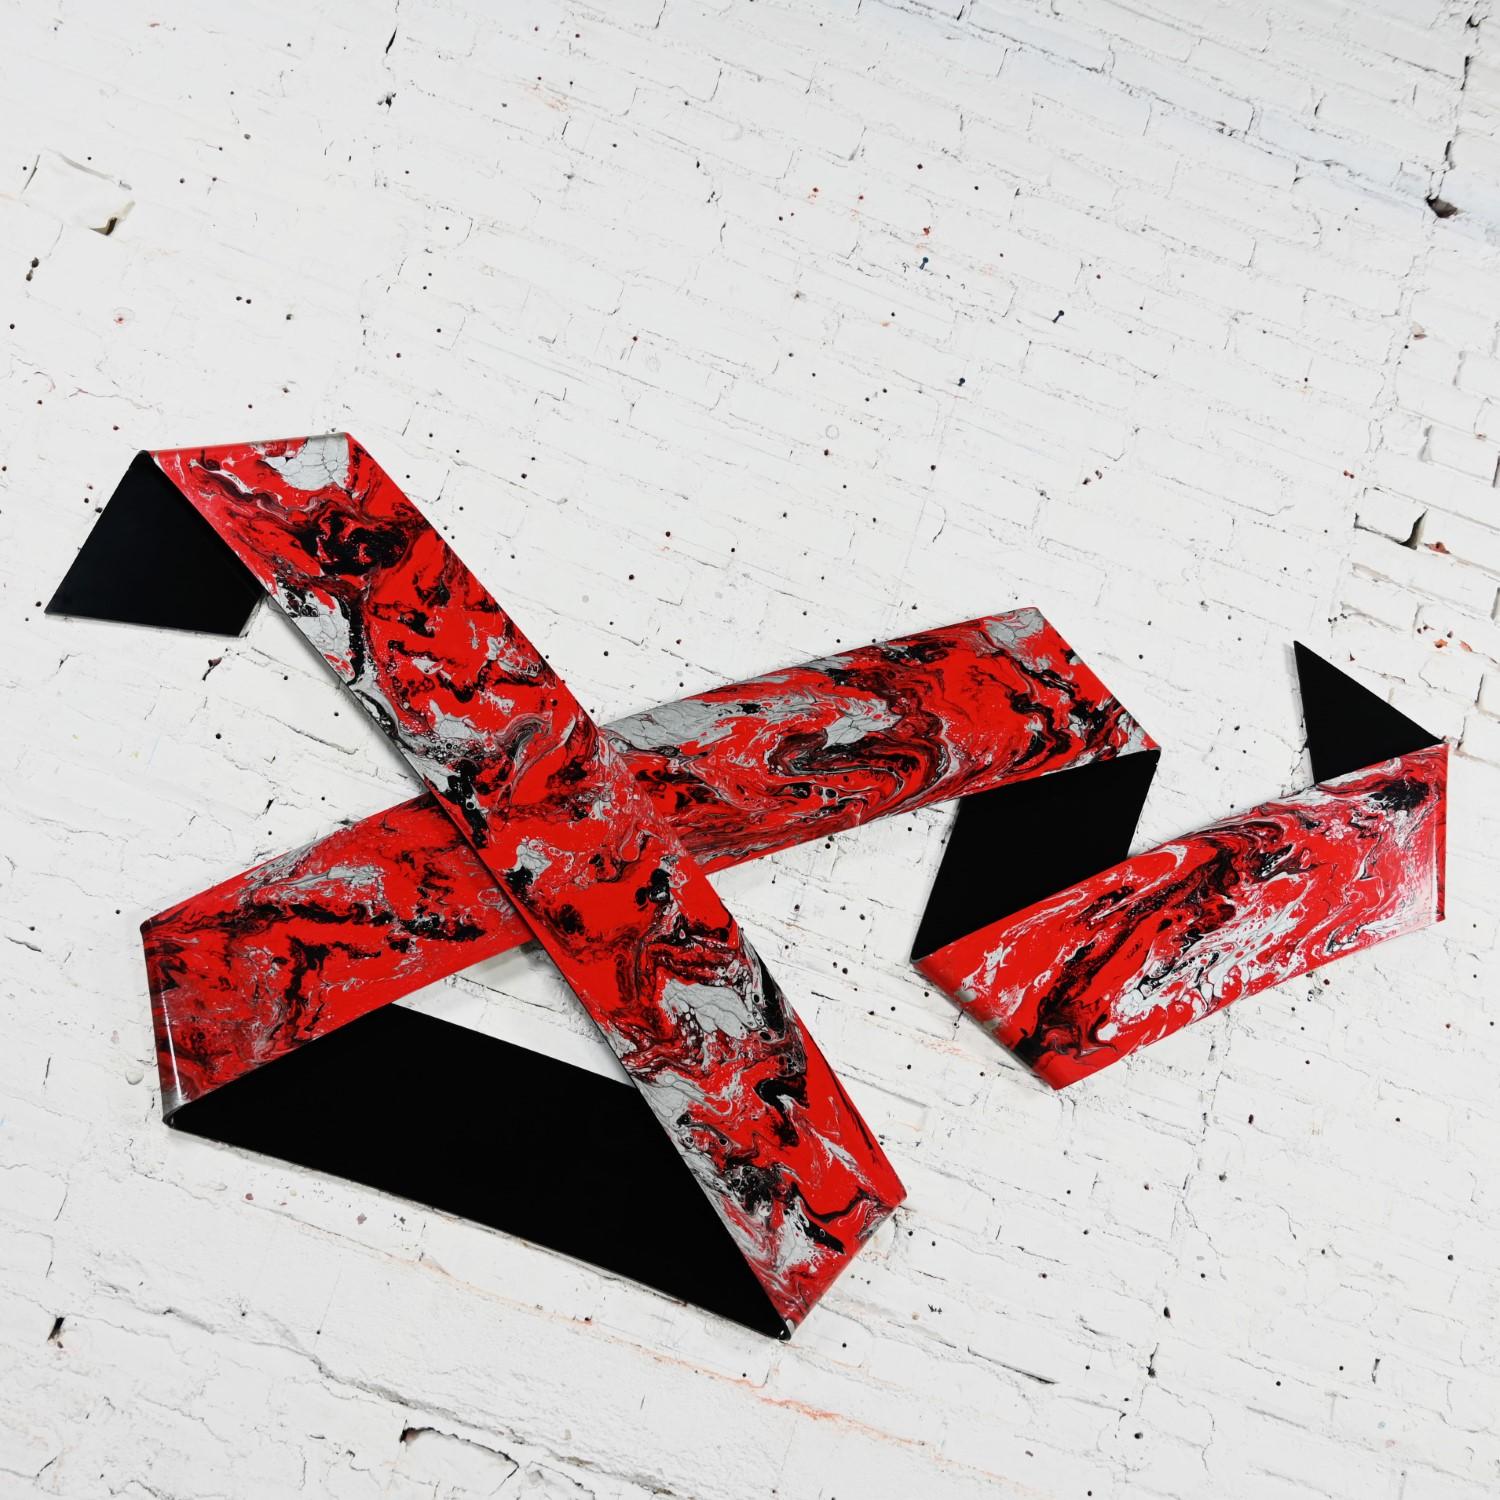 Phenomenal 1990 Abstract Richard Mann folded plexiglass Ribbon wall sculpture comprised of red, black, and metallic silver paint & powder. Beautiful condition, keeping in mind that this is vintage and not new so will have signs of use and wear even